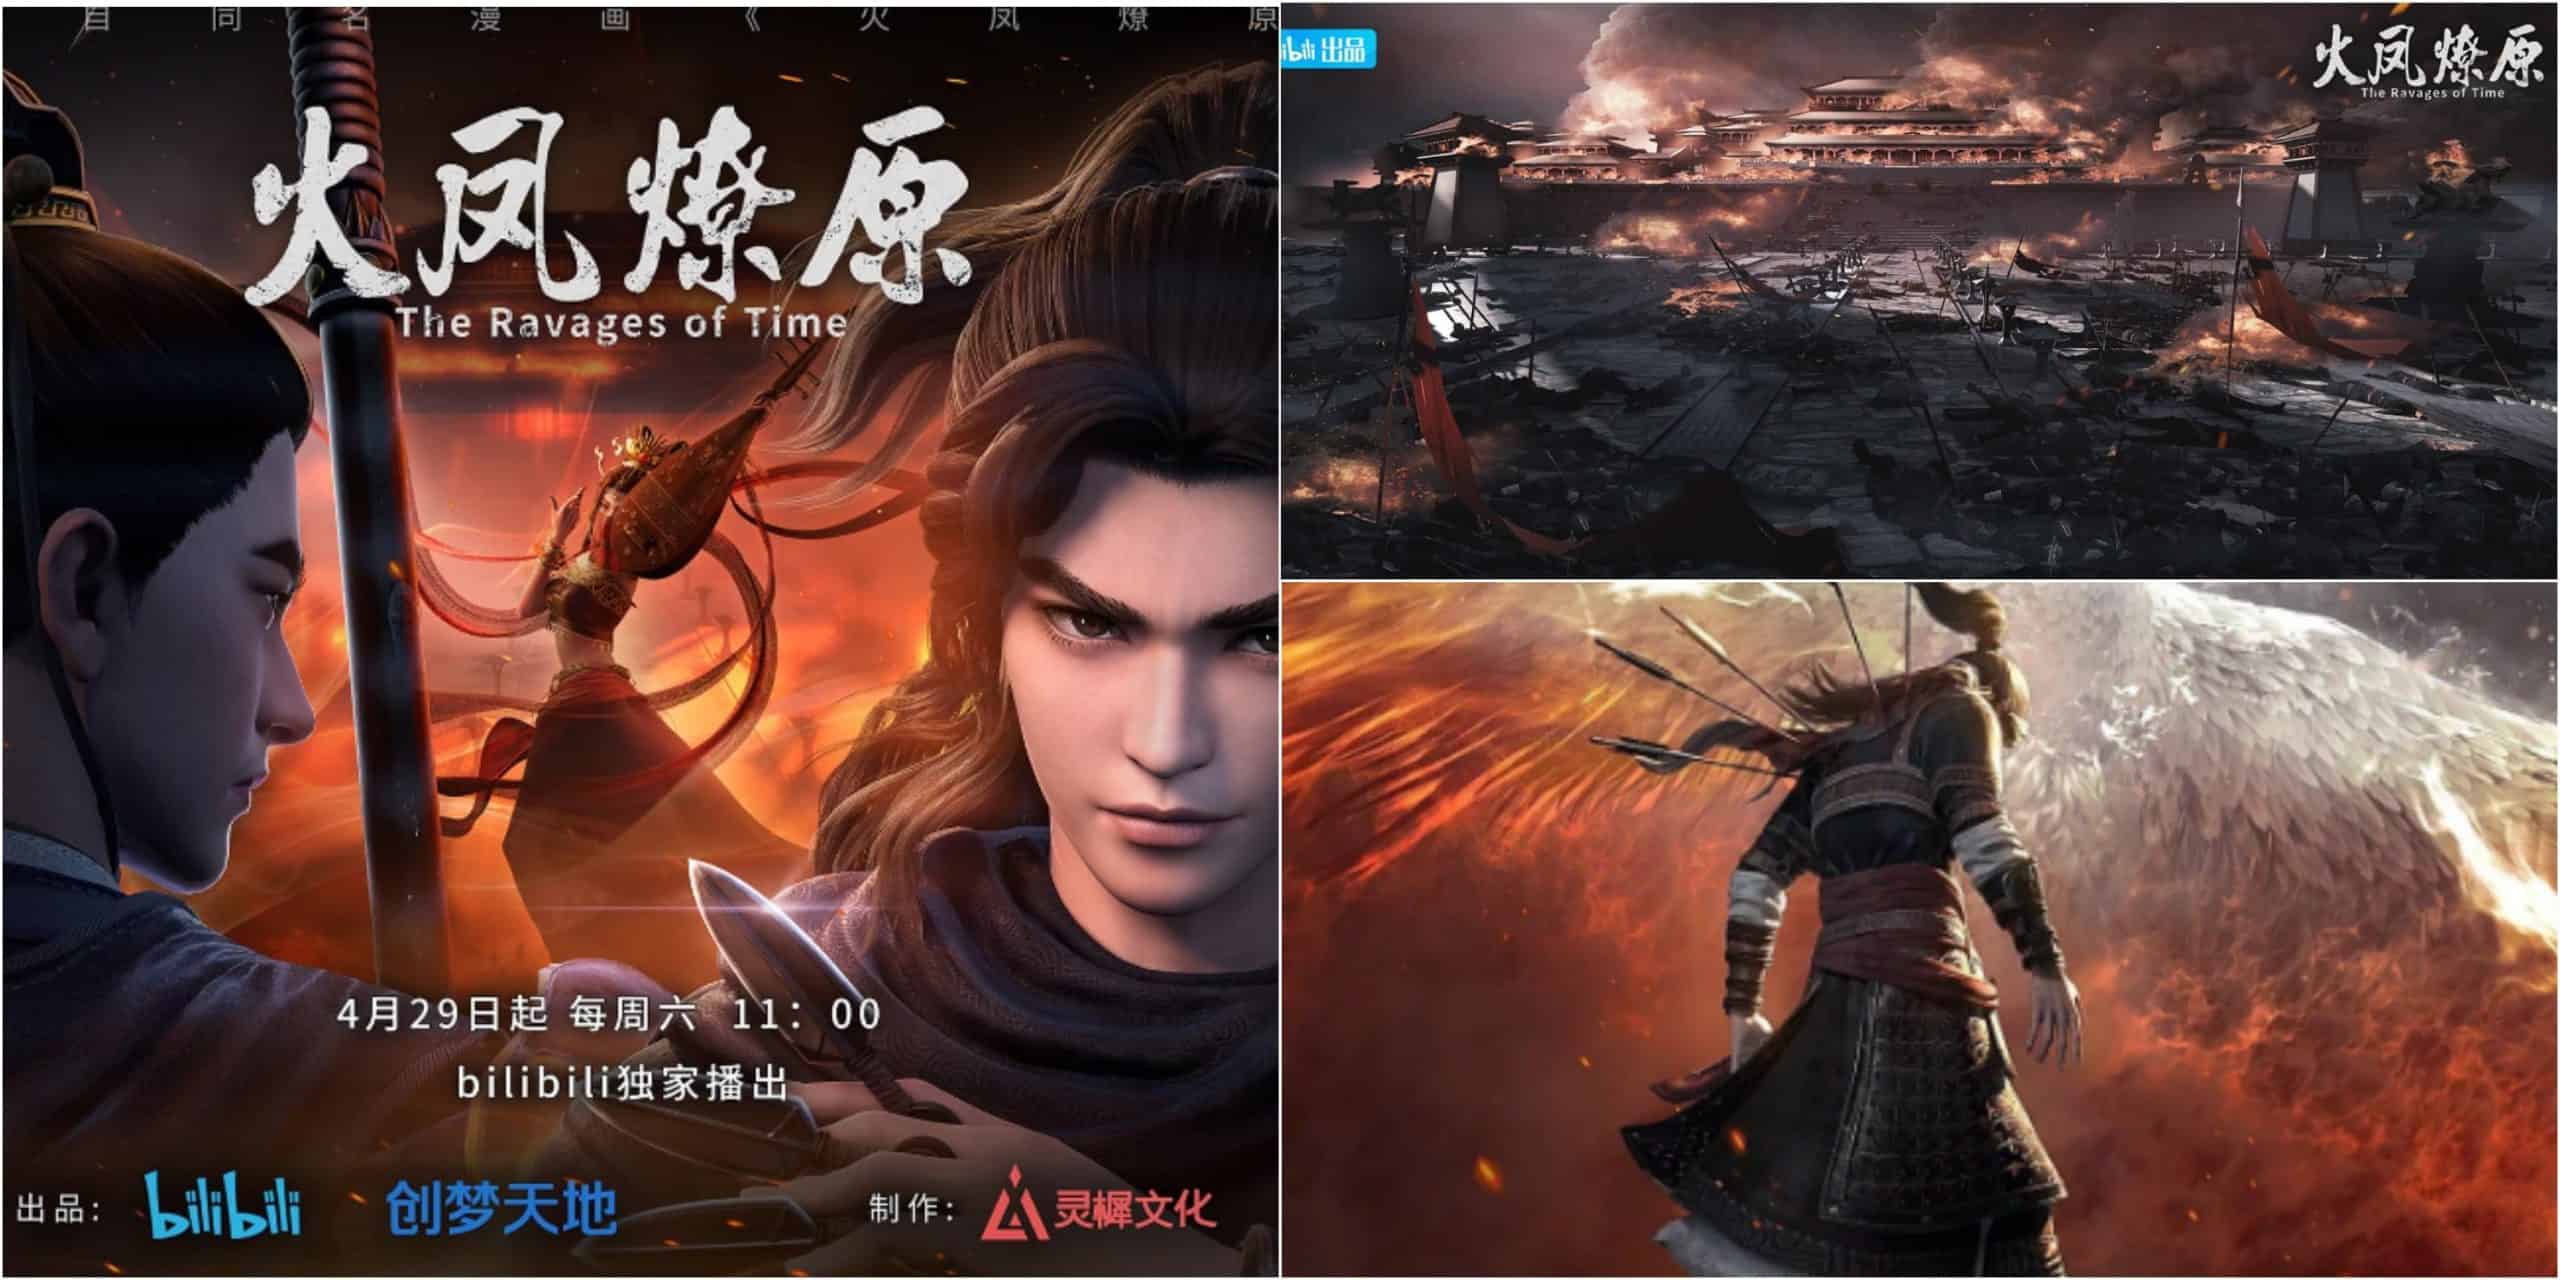 Chinese Anime How To Watch The Ravages of Time Episodes